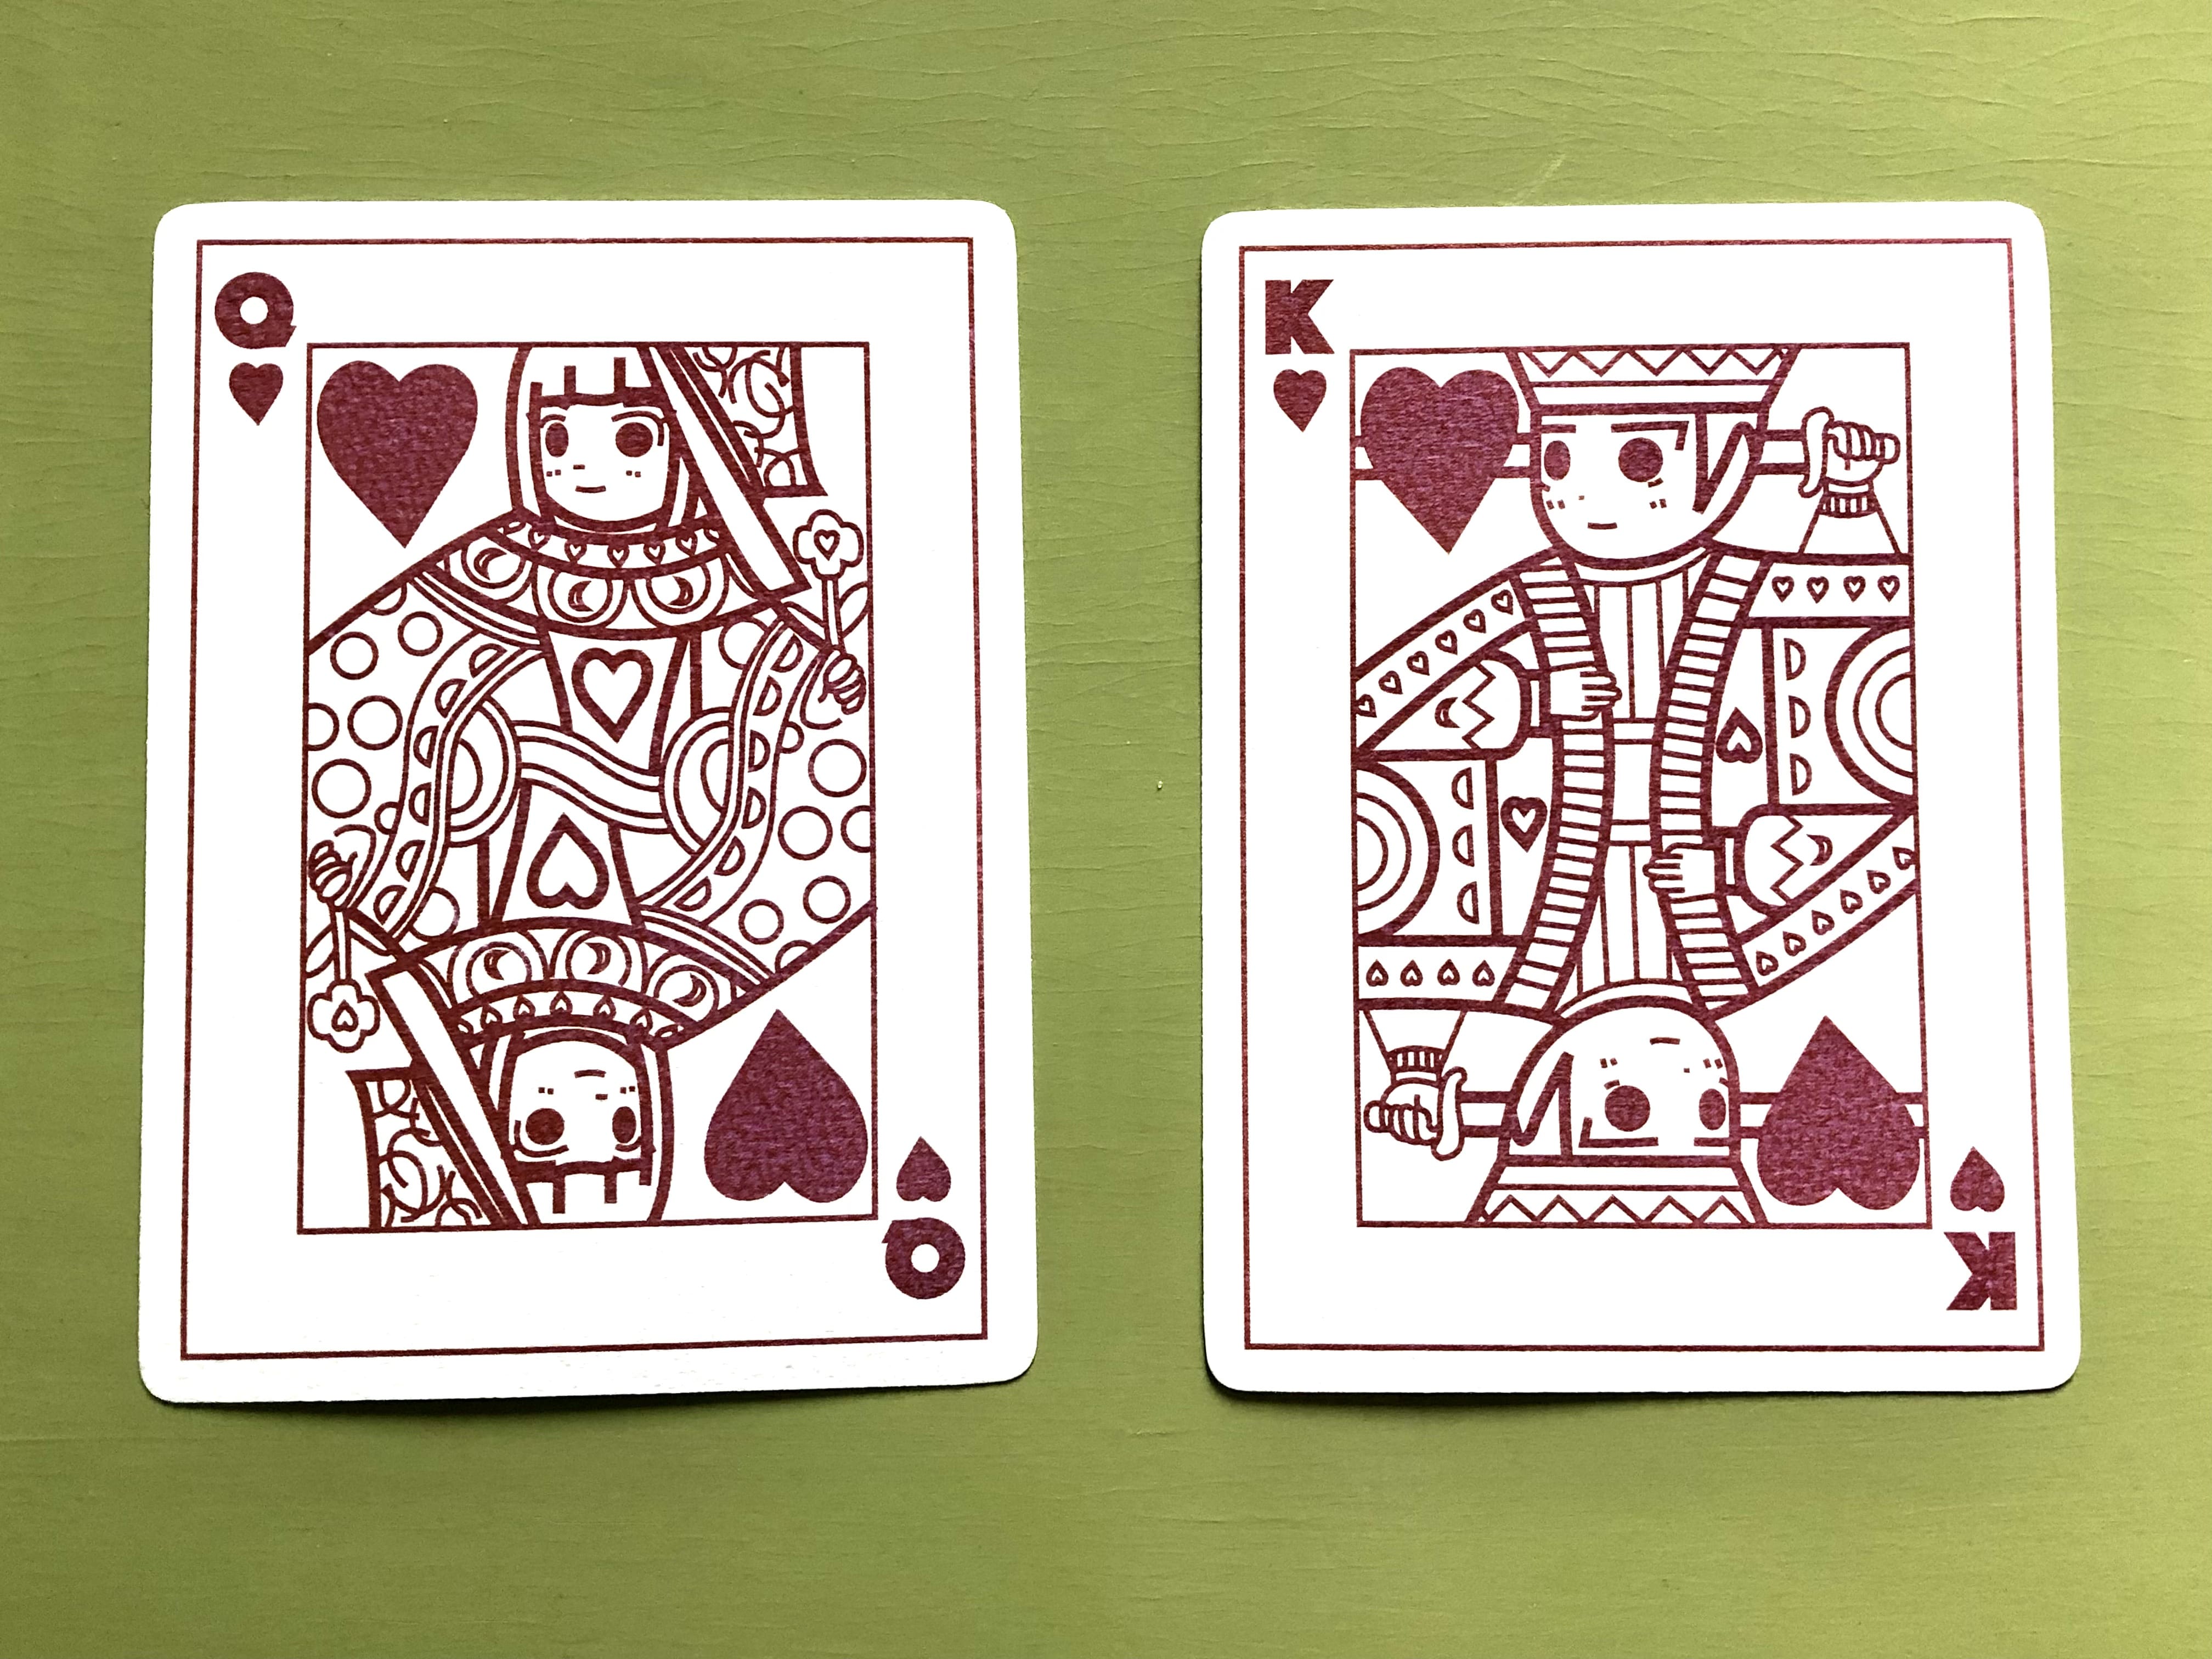 Postcard designs by Pui Ki Tse. Red coloured designs on white card. Design reminiscent of playing cards.